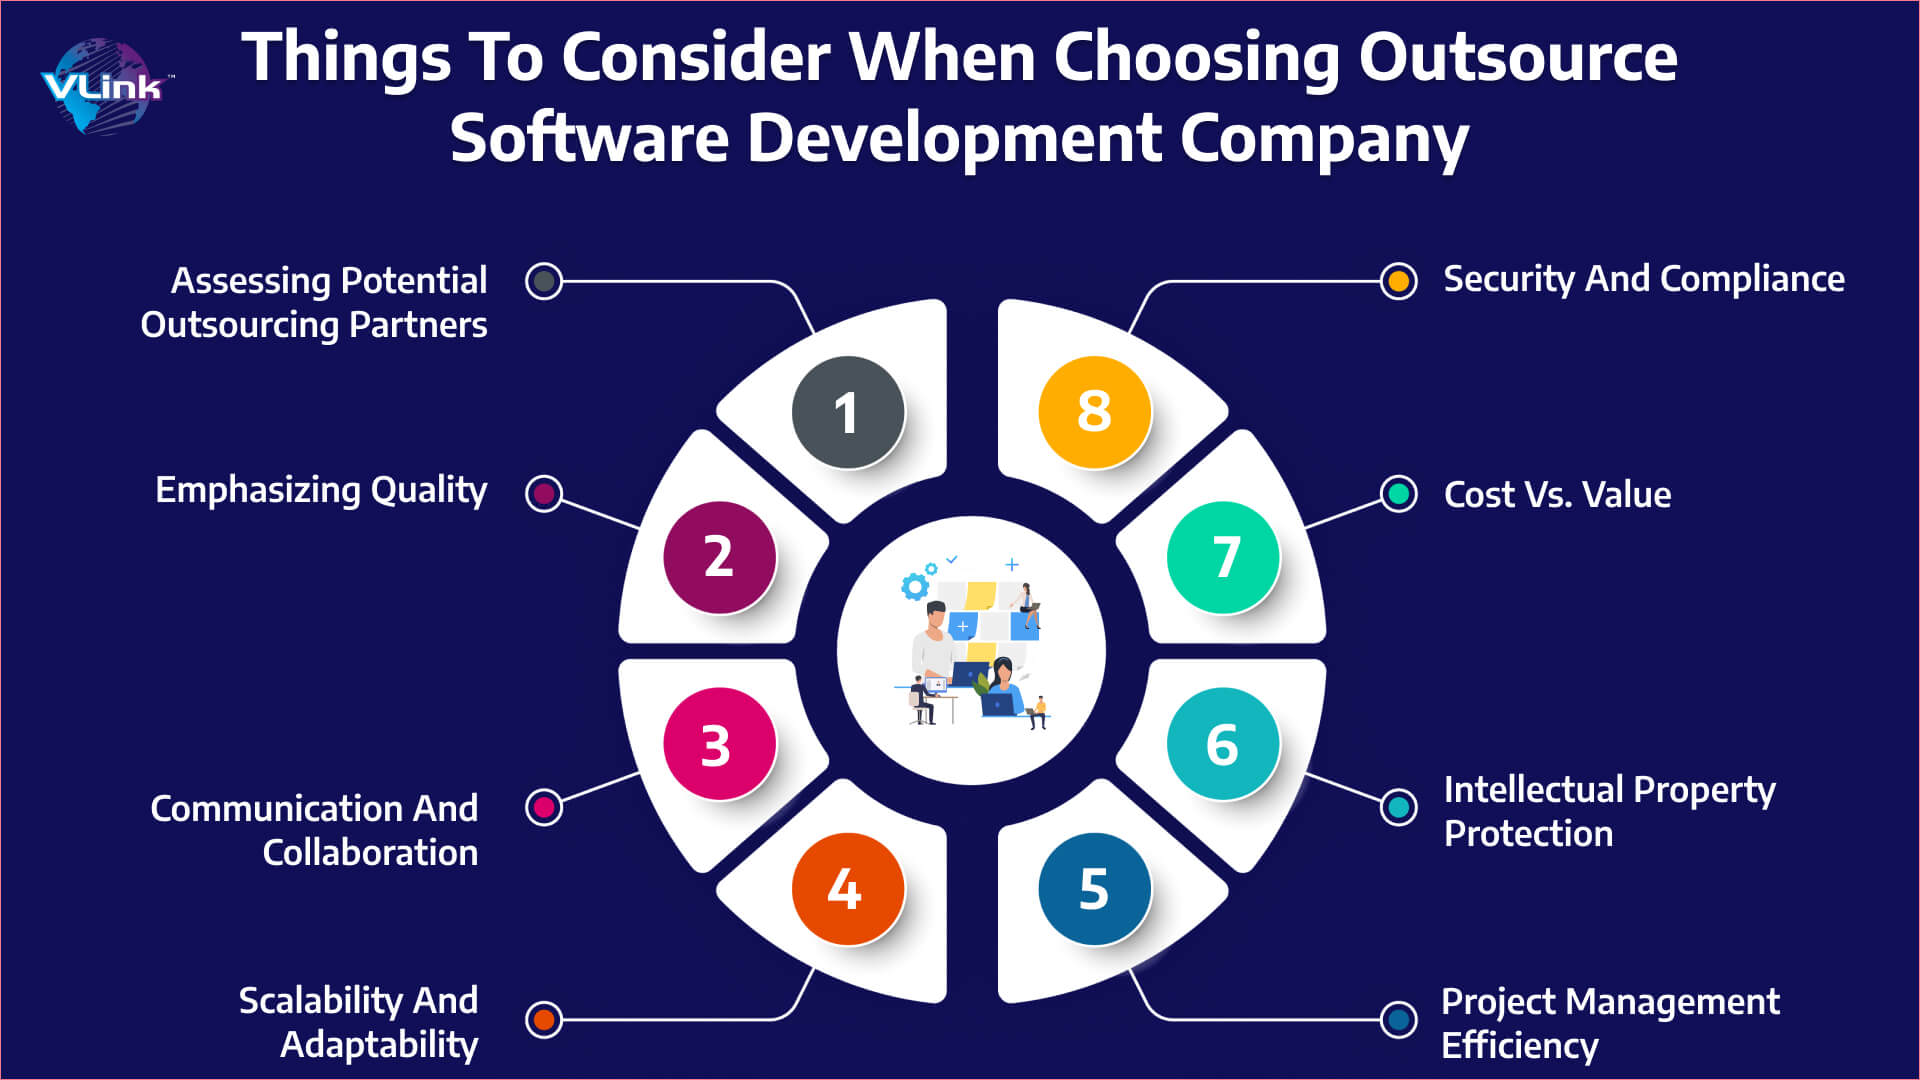 Things to Consider When Choosing an Outsource Software Development Company